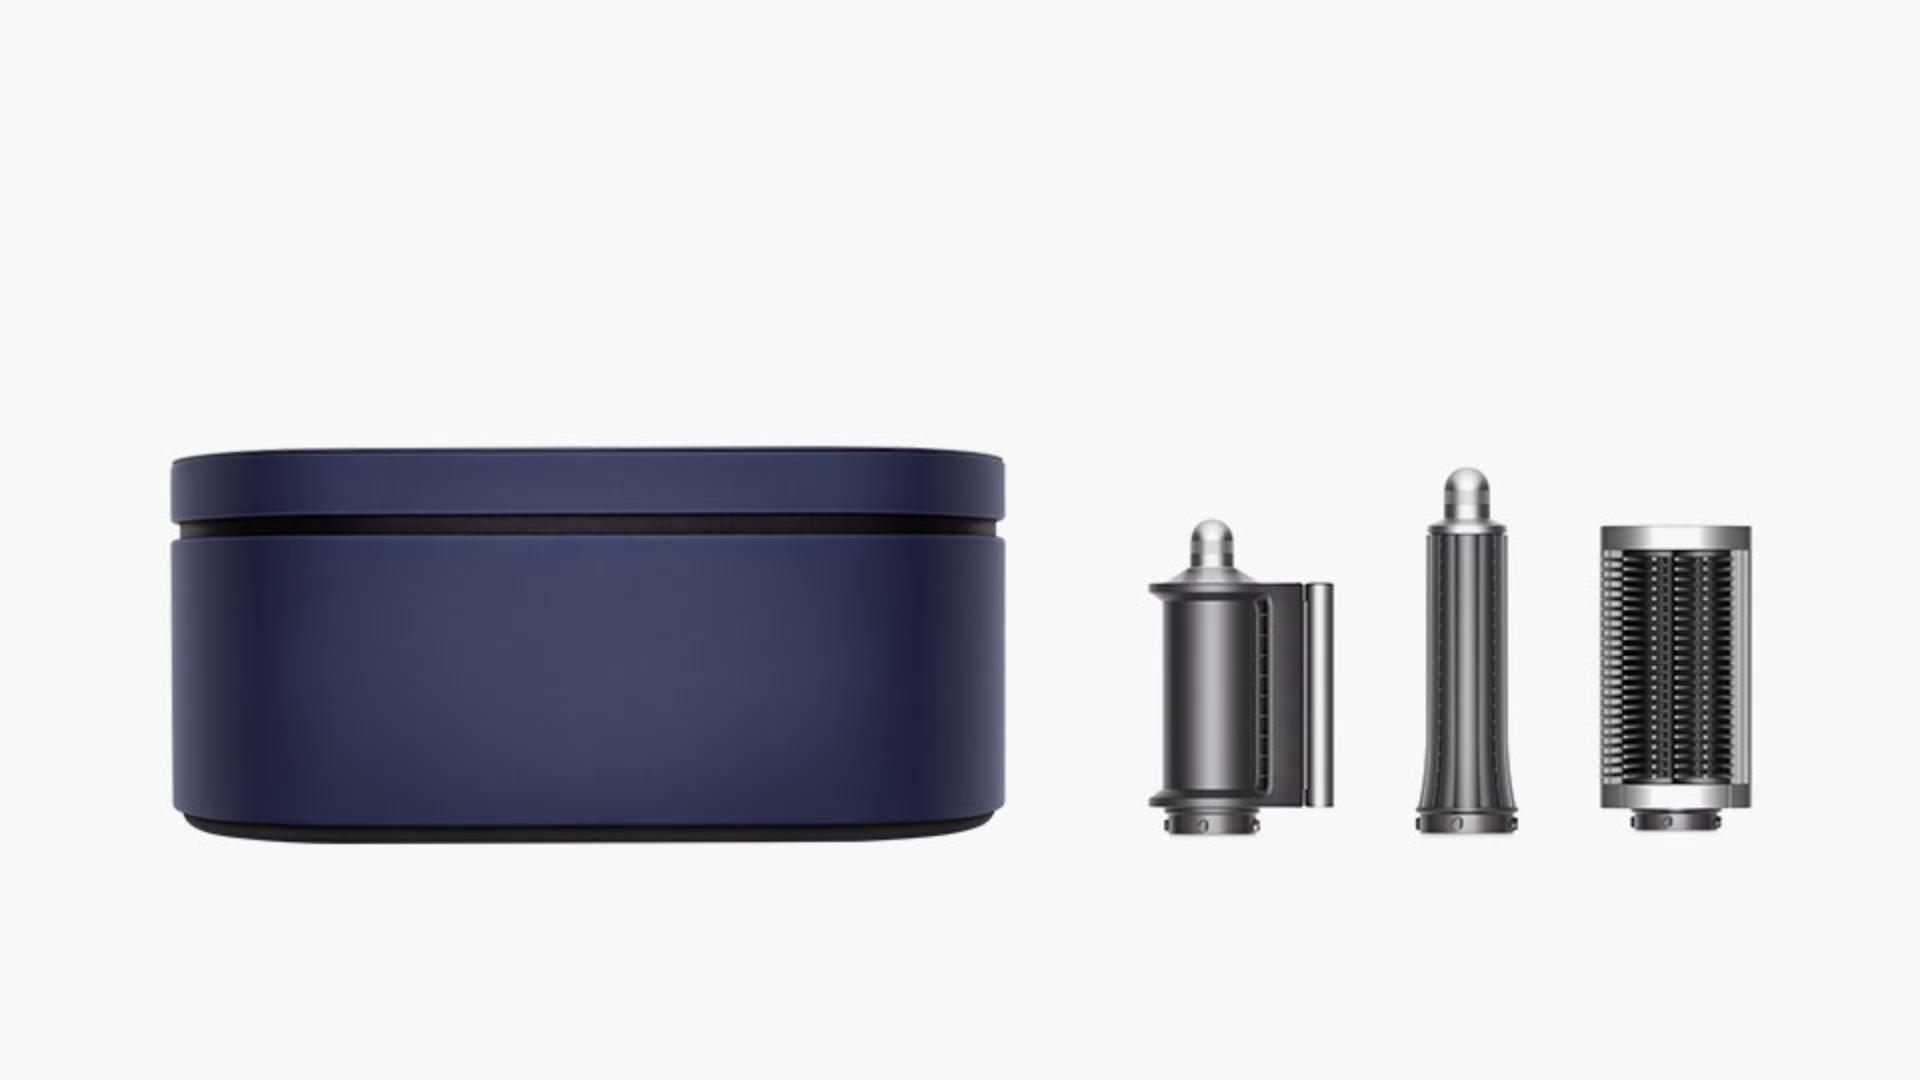 Re-engineered attachments for Dyson Airwrap multi-styler